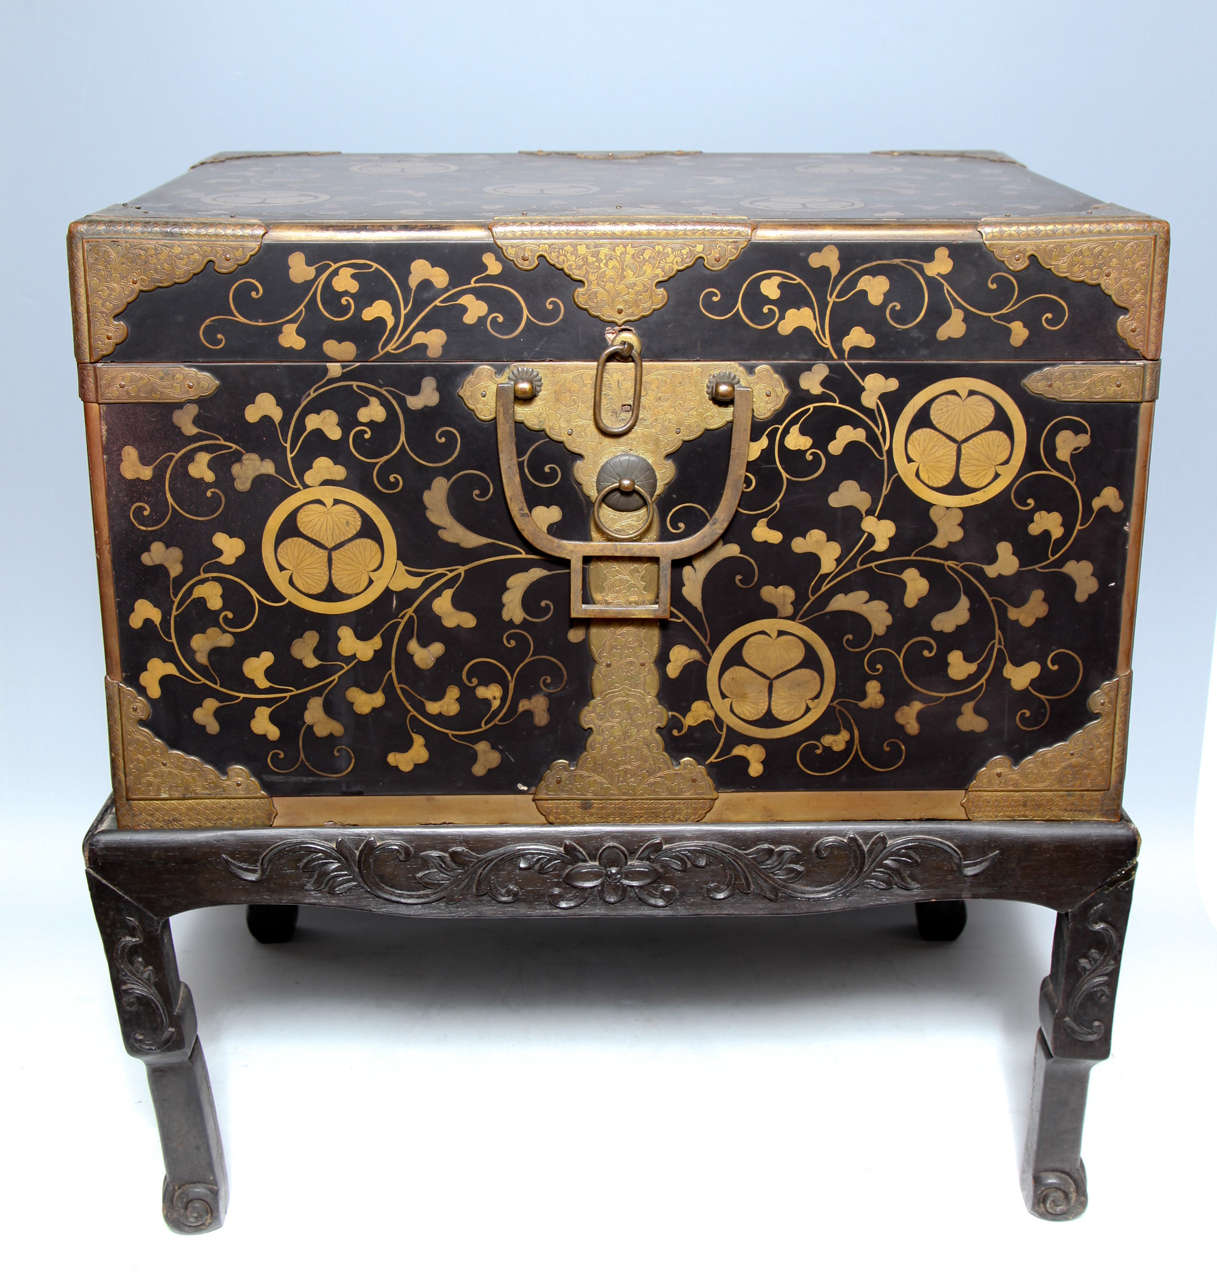 A fine pair of Japanese lacquer traveling trunks, on English Style bases, the upper portion opens revealing a lacquer tray and further storage below, in perfect condition. The exterior bears the three- leaf (crest) of the ancient Tokagawa family. 